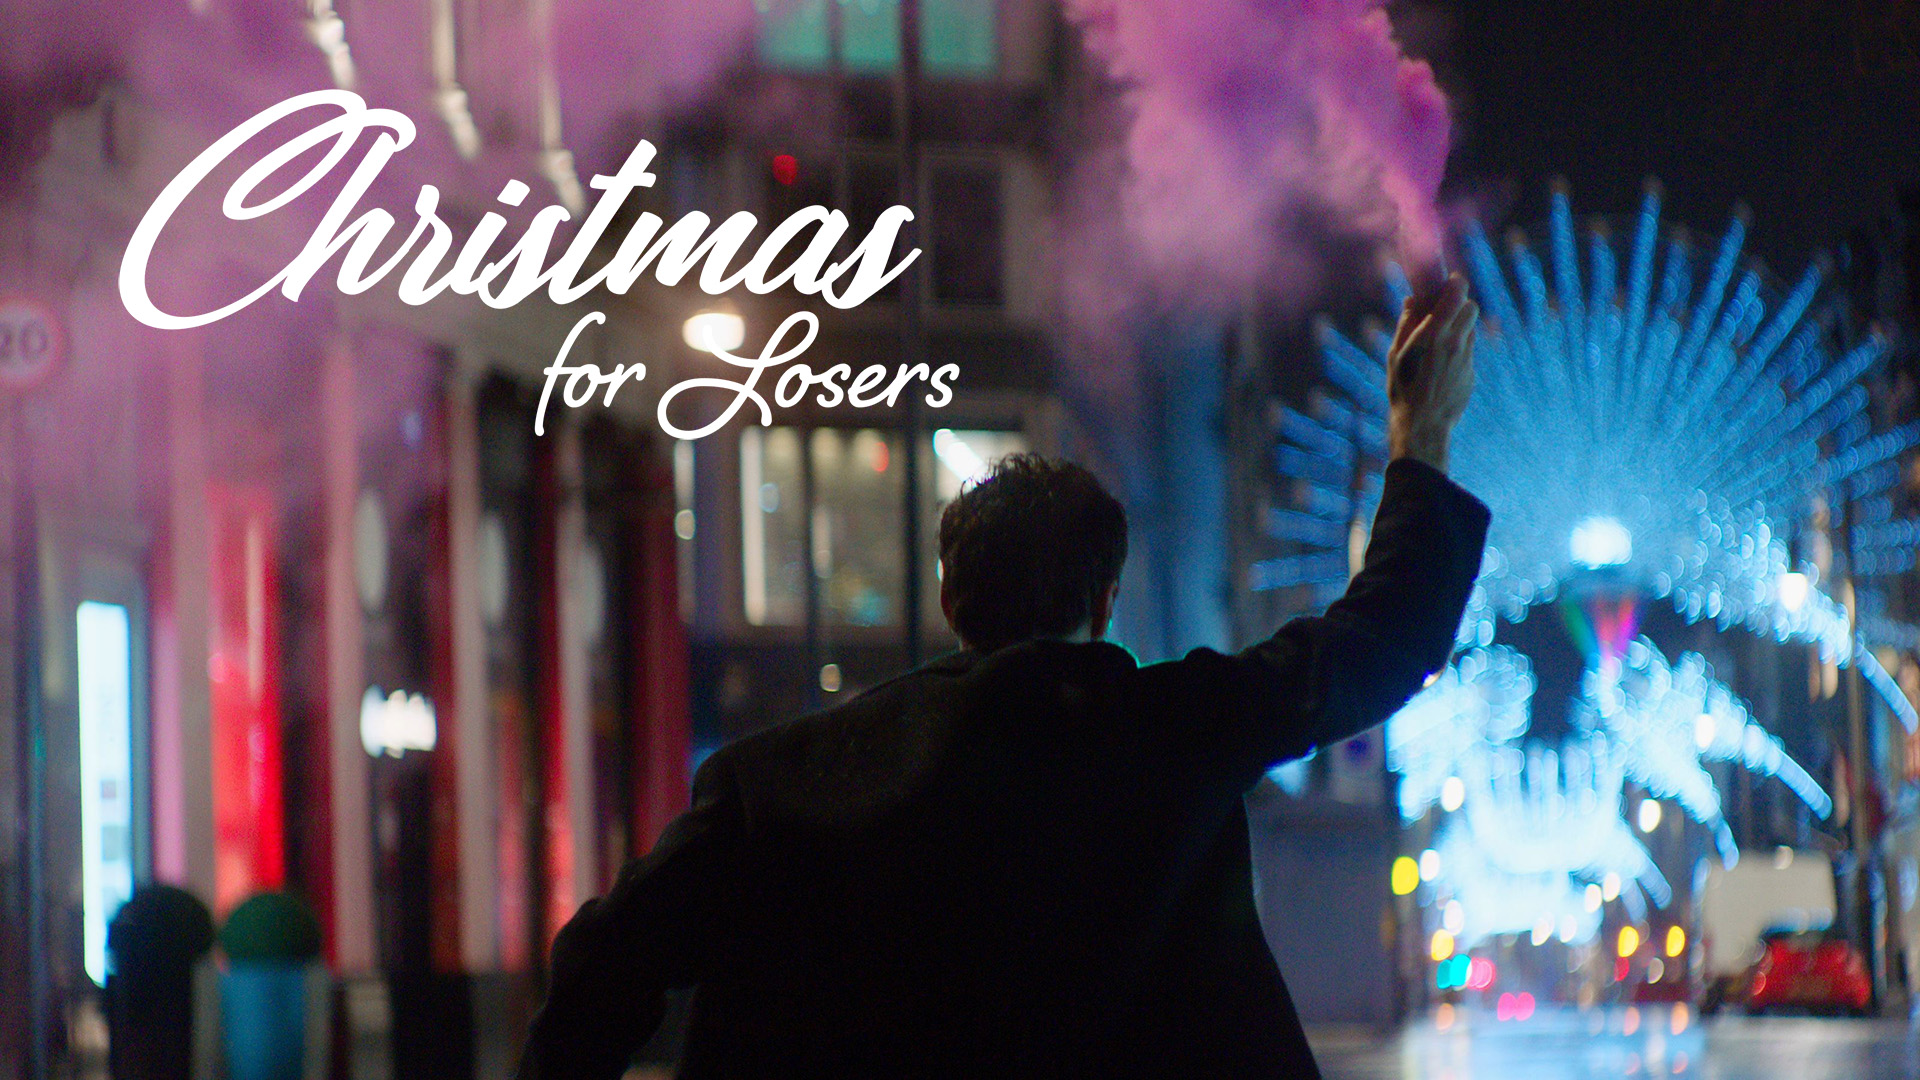 Christmas-for-losers-music-video-01.jpg